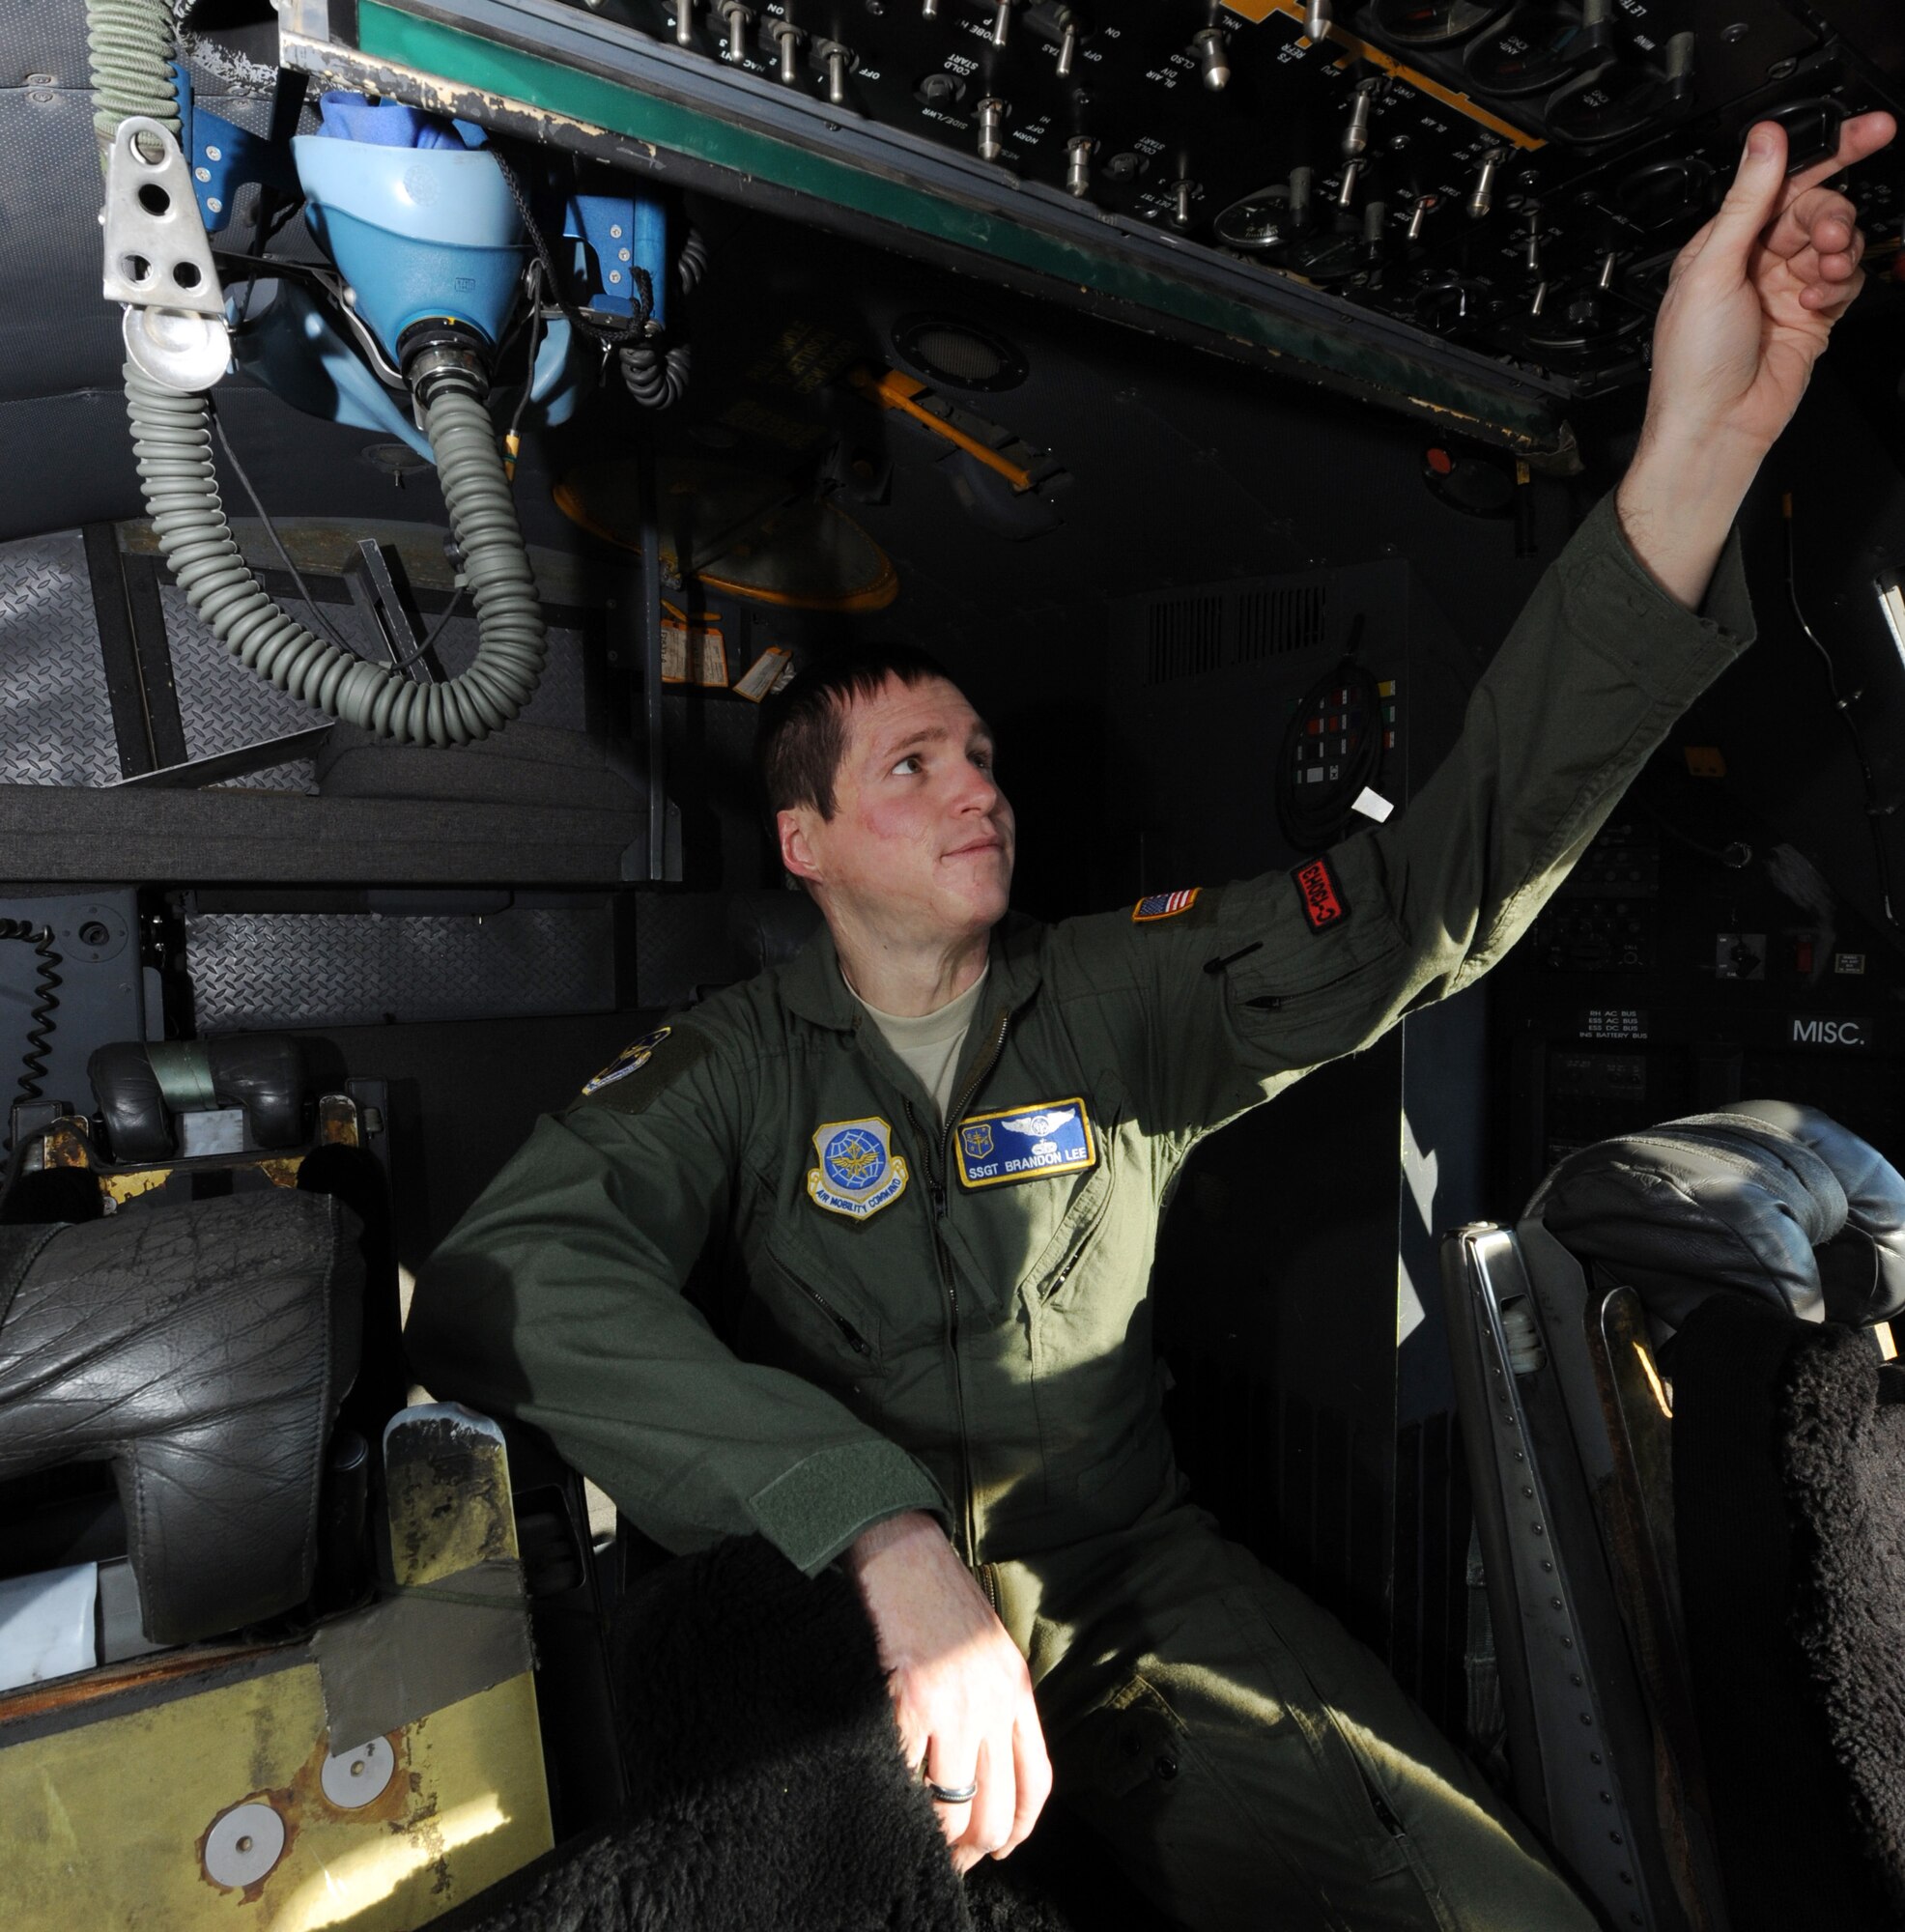 Staff Sgt. Brandon Lee, the 19th Operations Group flight engineer, performs a cockpit check prior to take off inside a C-130, Jan. 3, 2012, at Little Rock Air Force Base, Ark. Lee maintains and distributes flight publications for six operations squadrons and four different aircraft. (U.S. Air Force photo by Airman 1st Class Rusty Frank)